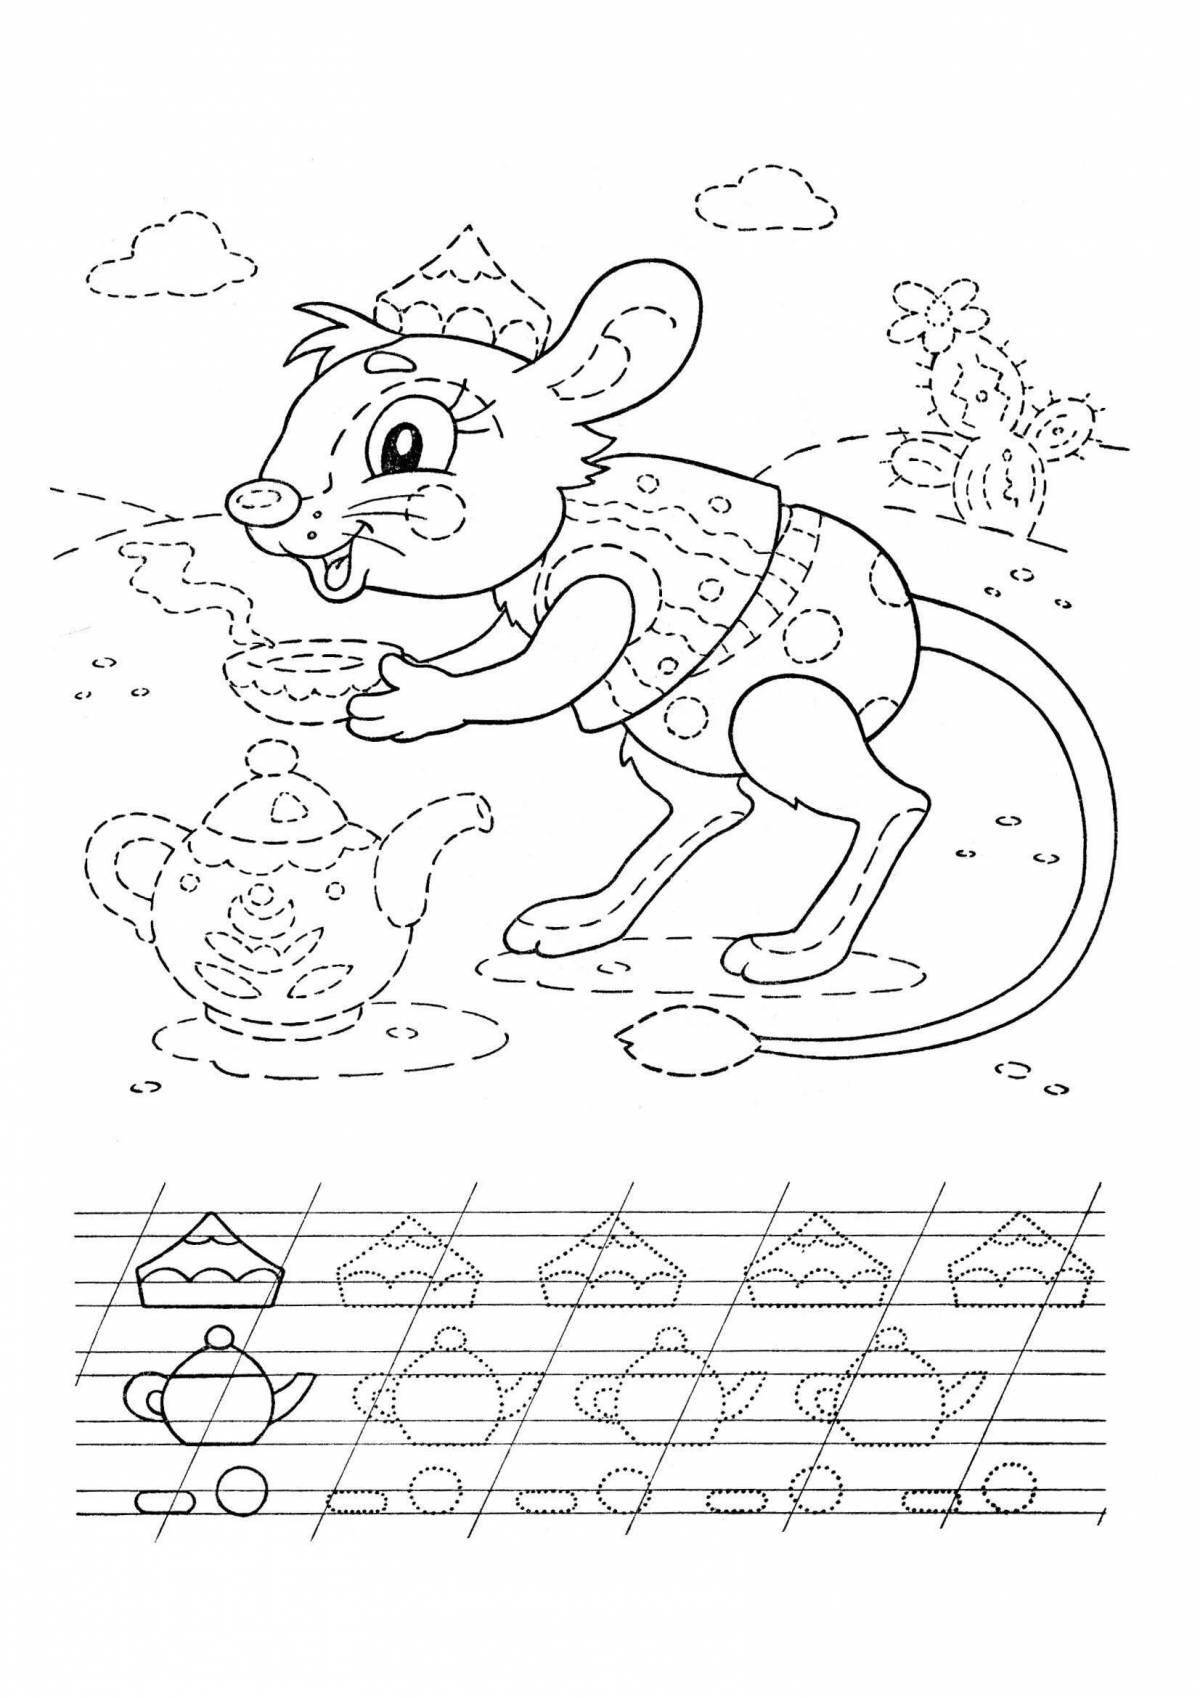 Adorable recipe coloring book for 4-5 year olds